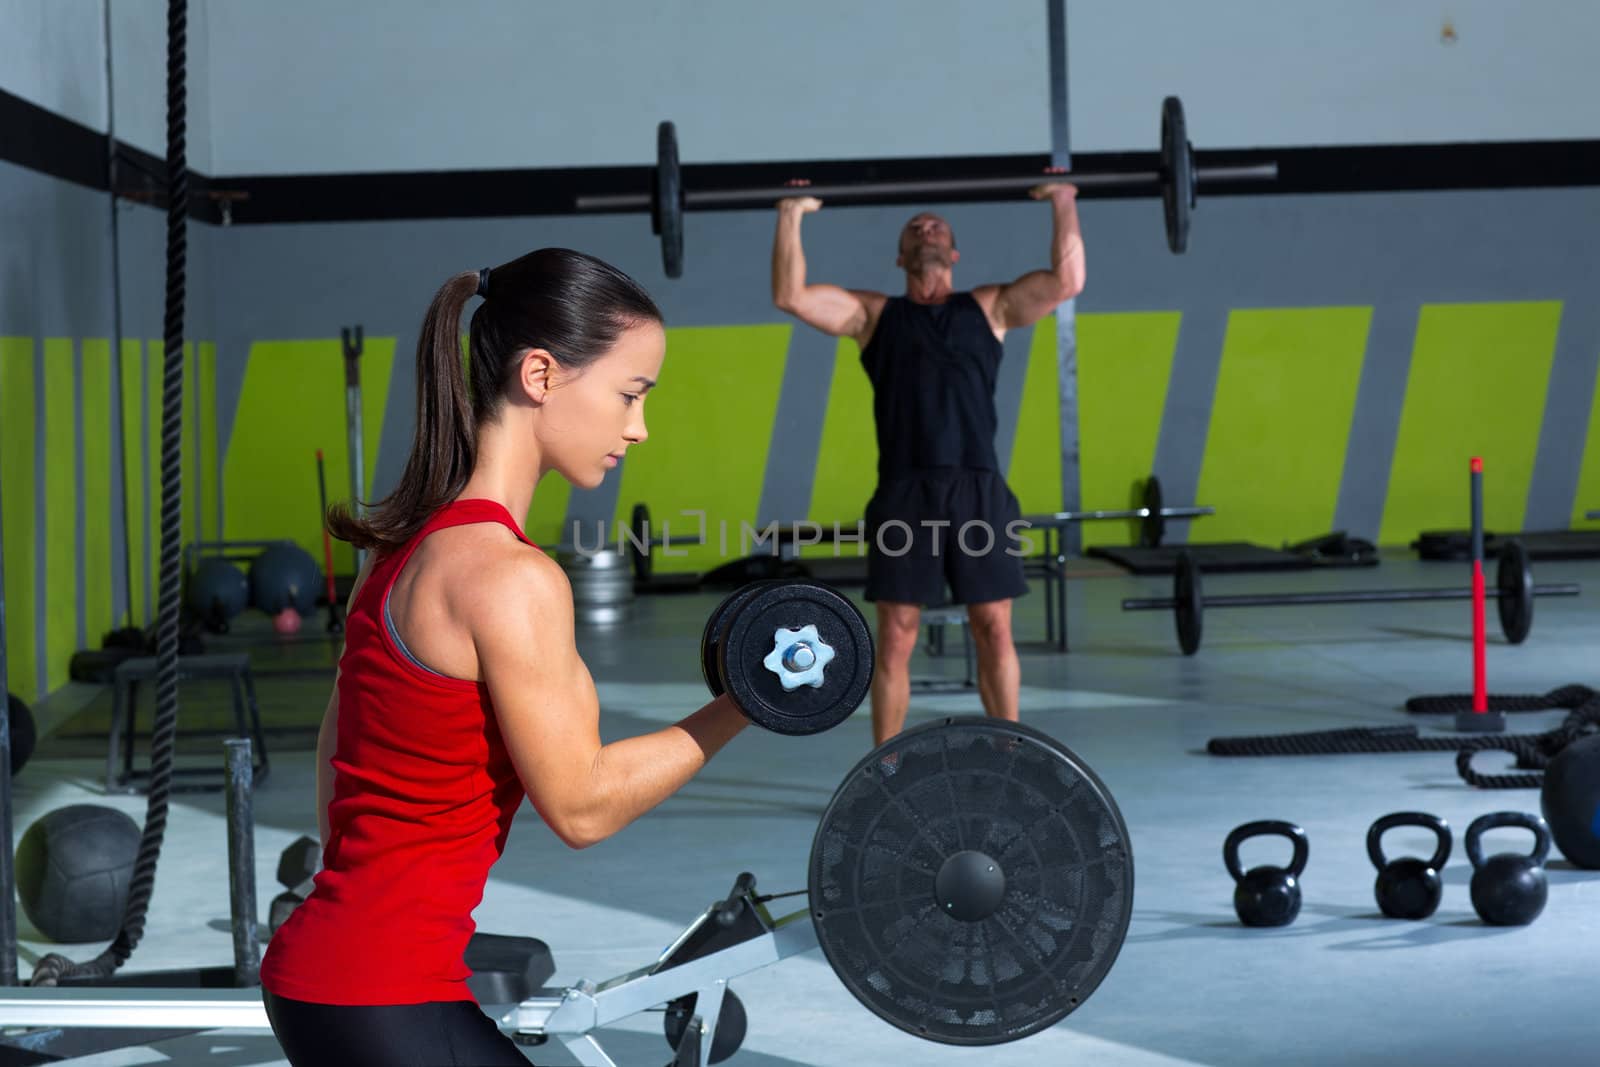 girl dumbbell and man weight lifting bar workout by lunamarina